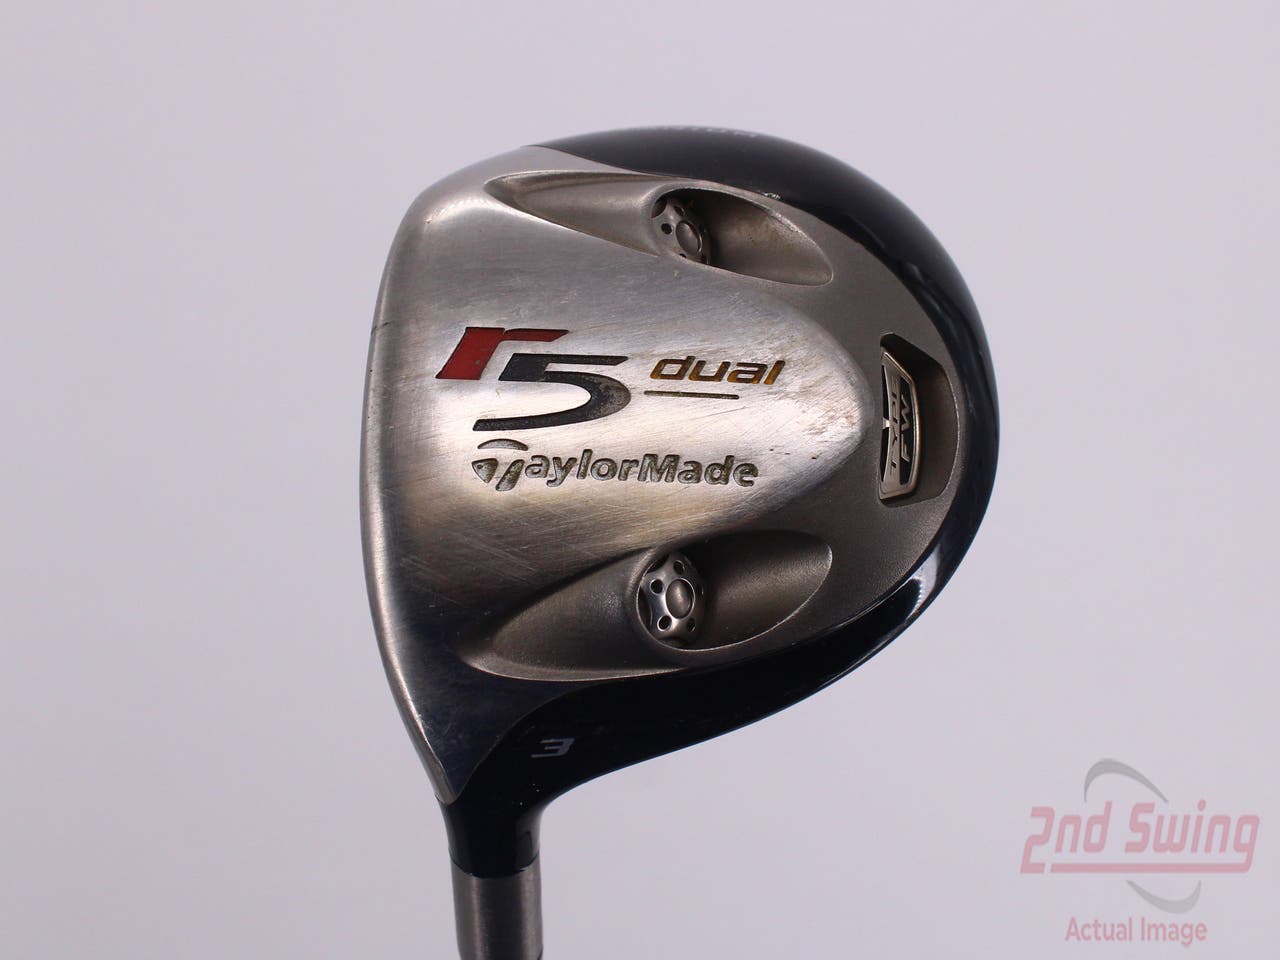 TaylorMade R5 Dual Fairway Wood 3 Wood 3W TM M.A.S.2 55 Graphite Regular Left Handed 43.0in